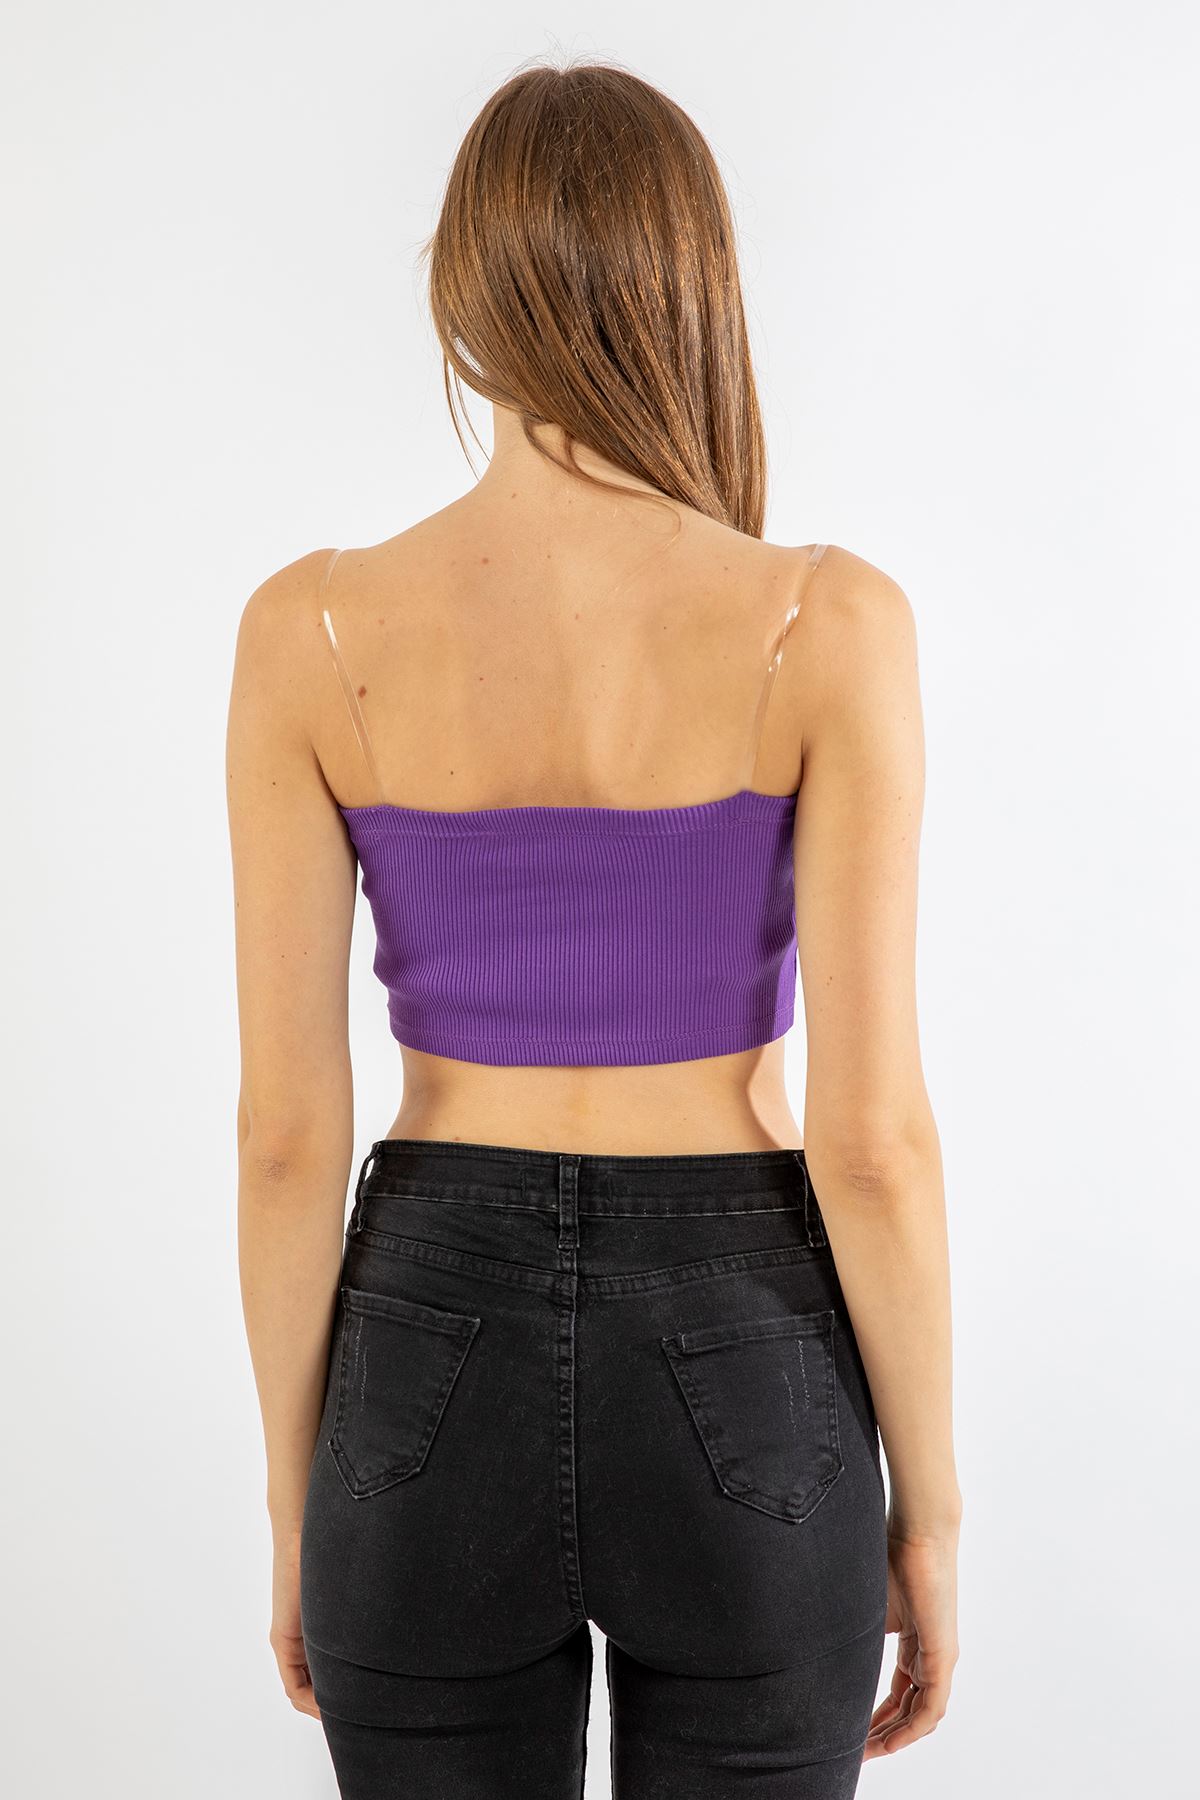 Camisole Fabric Sleeveless Strapless Neck Tight Fit Women Bustier - Purple